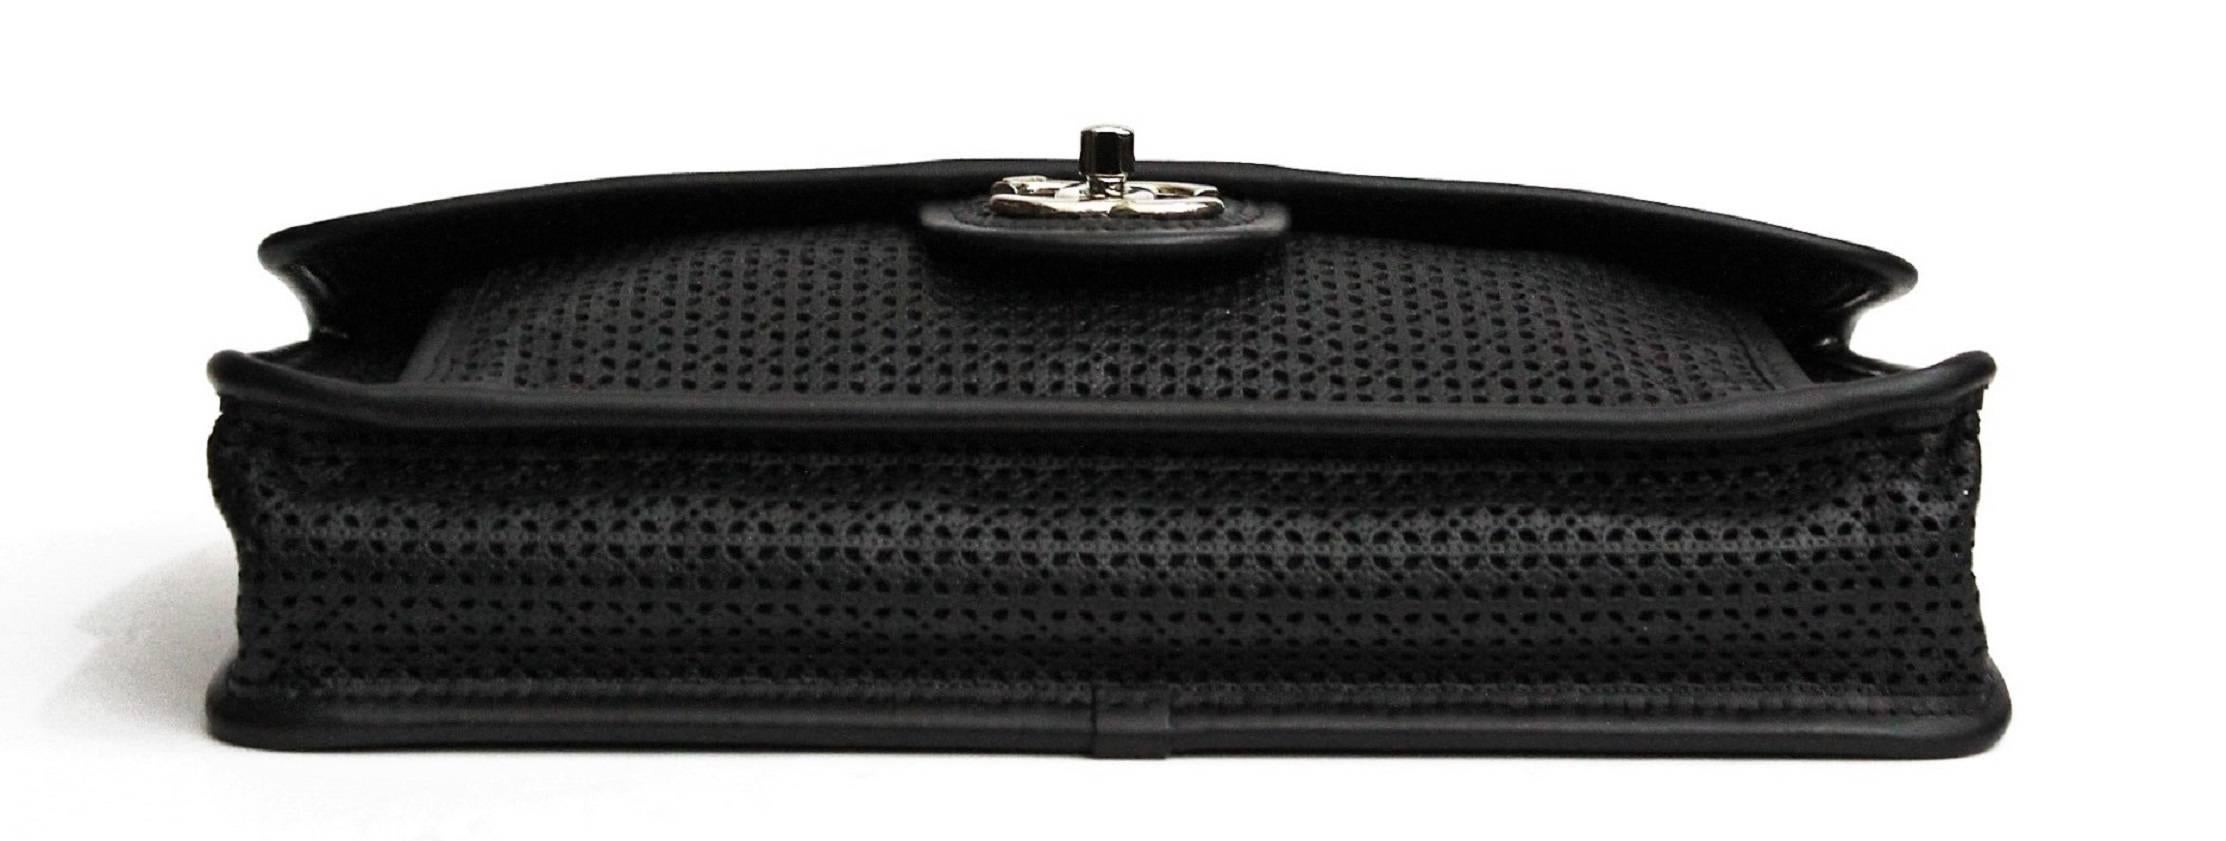 CHANEL Blu Navy Perforated Leather Up in the Air Flap Bag Cruise 2015 1